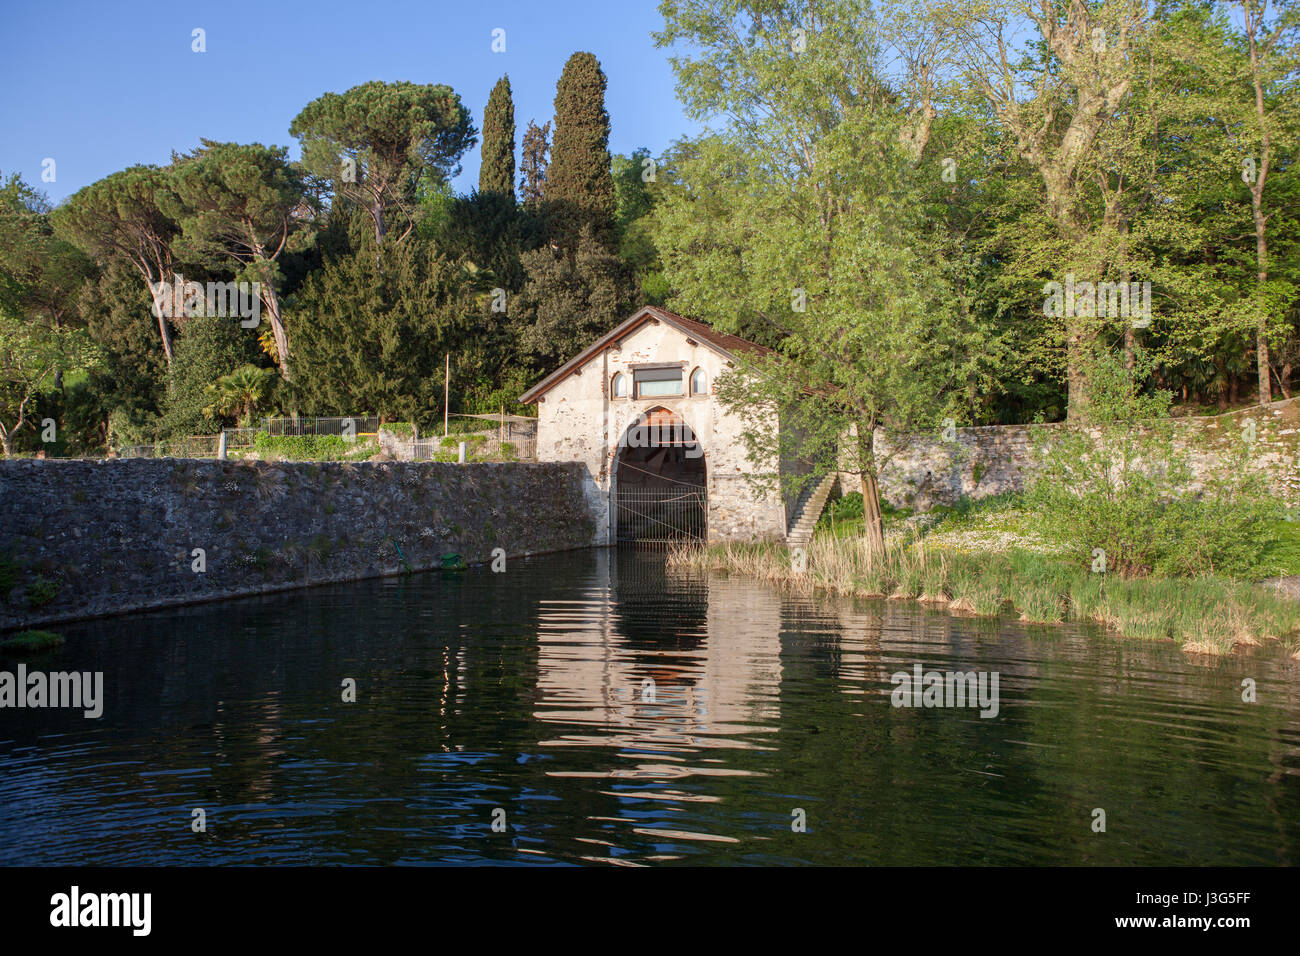 Entrance to a private area for boats. Ispra, Italy Stock Photo